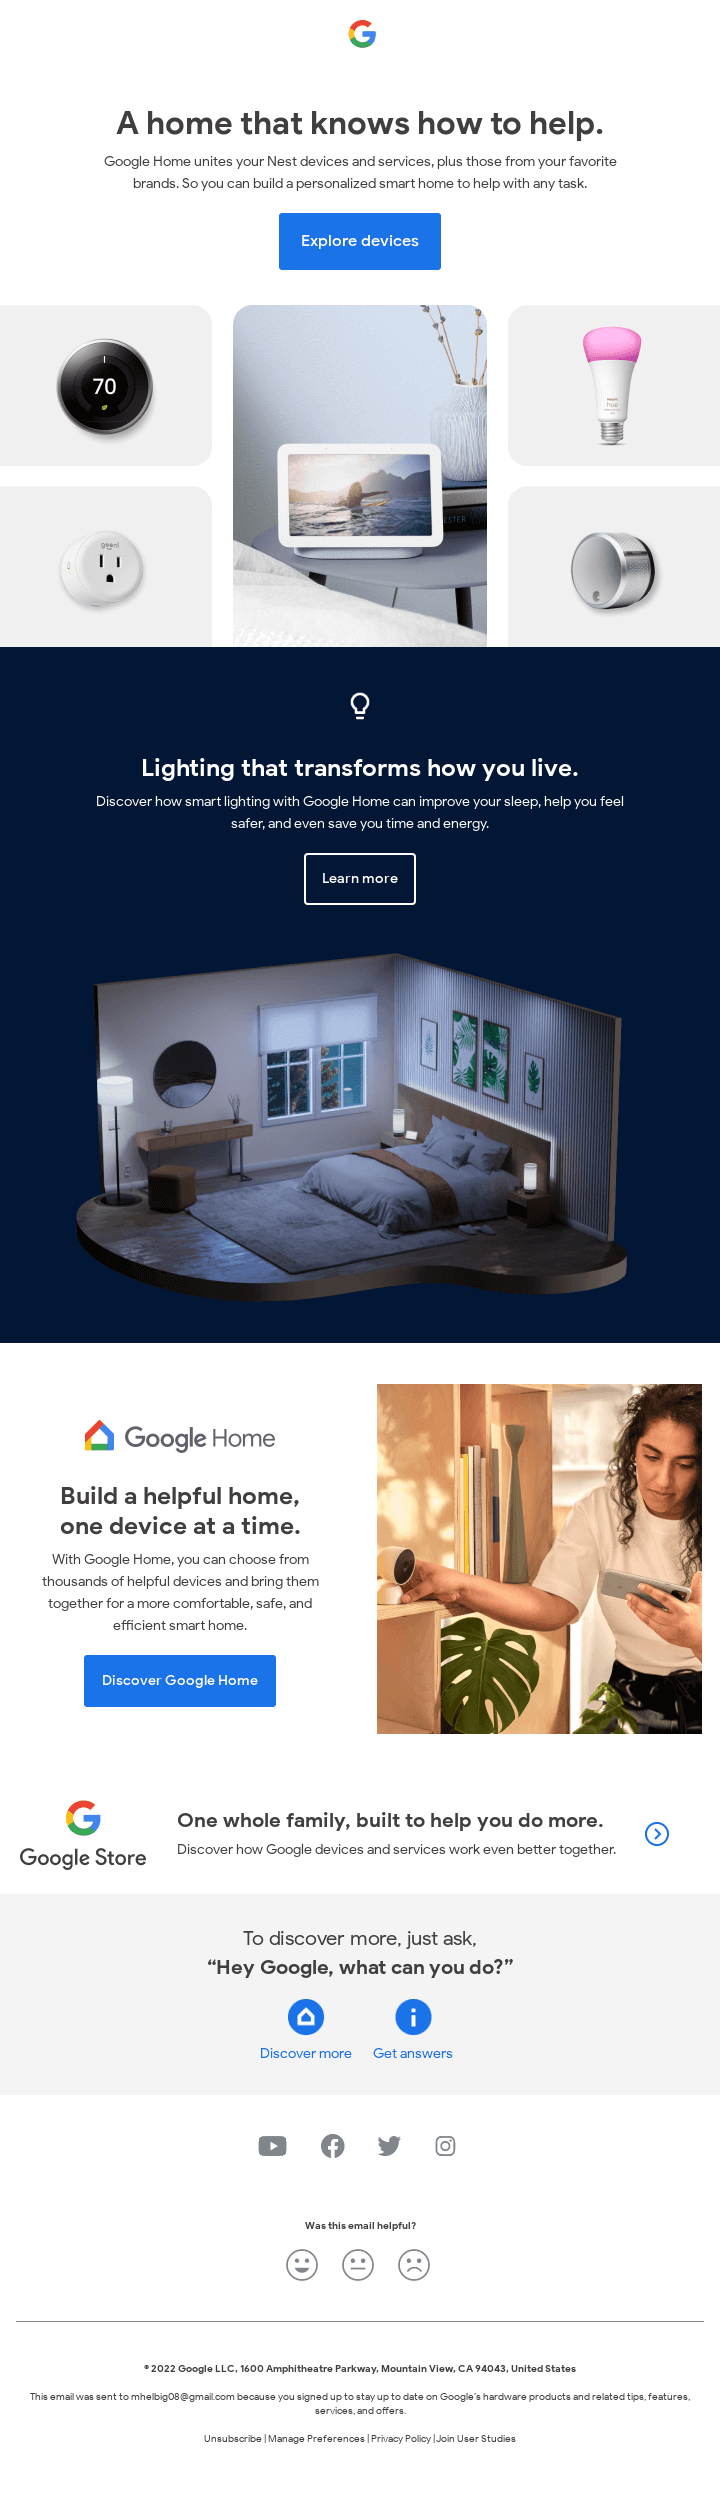 Smiles Davis, turn your house into a smart home